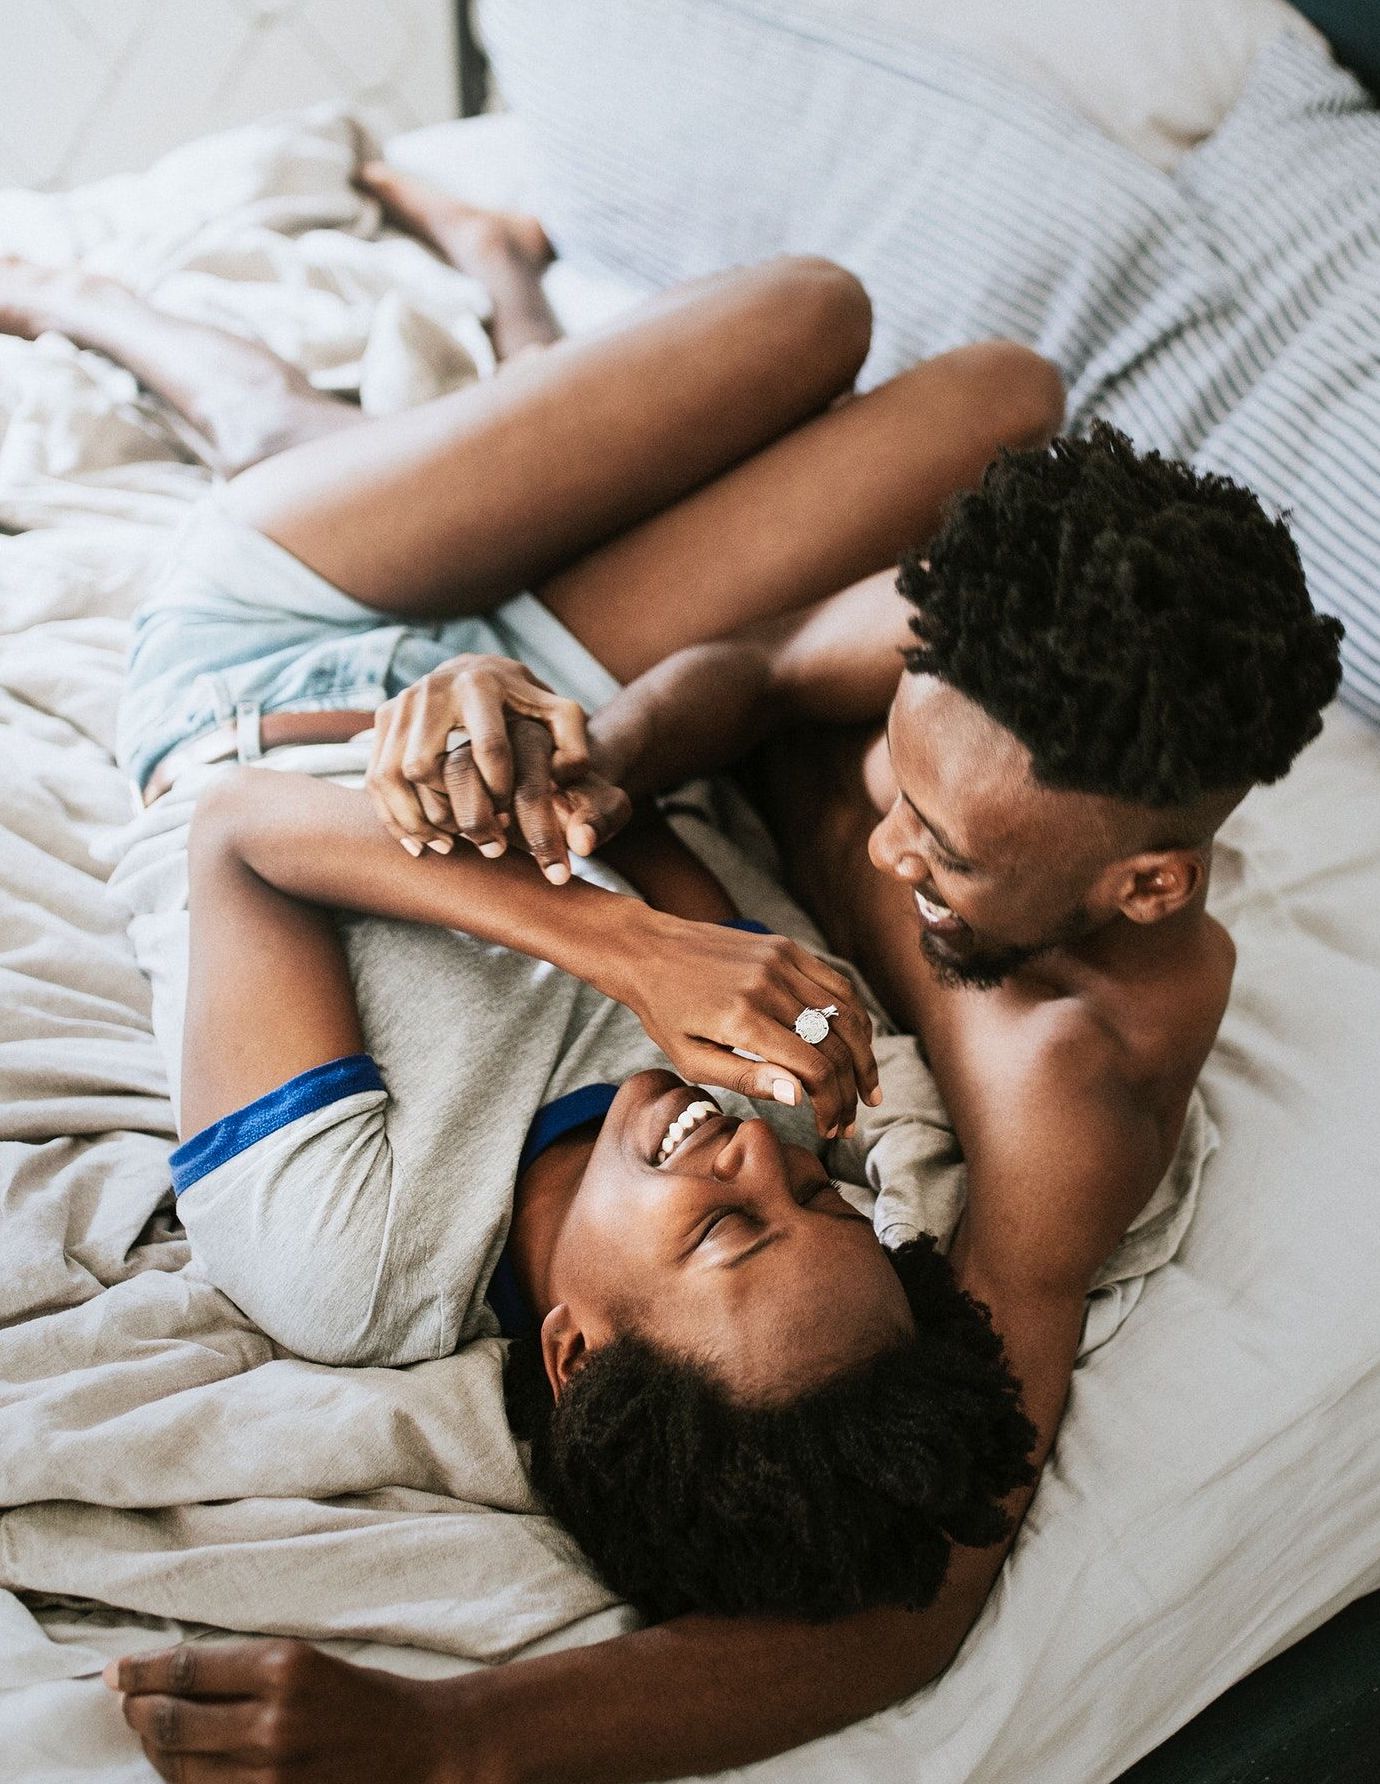 Have conversations on sex and intimacy before you get married